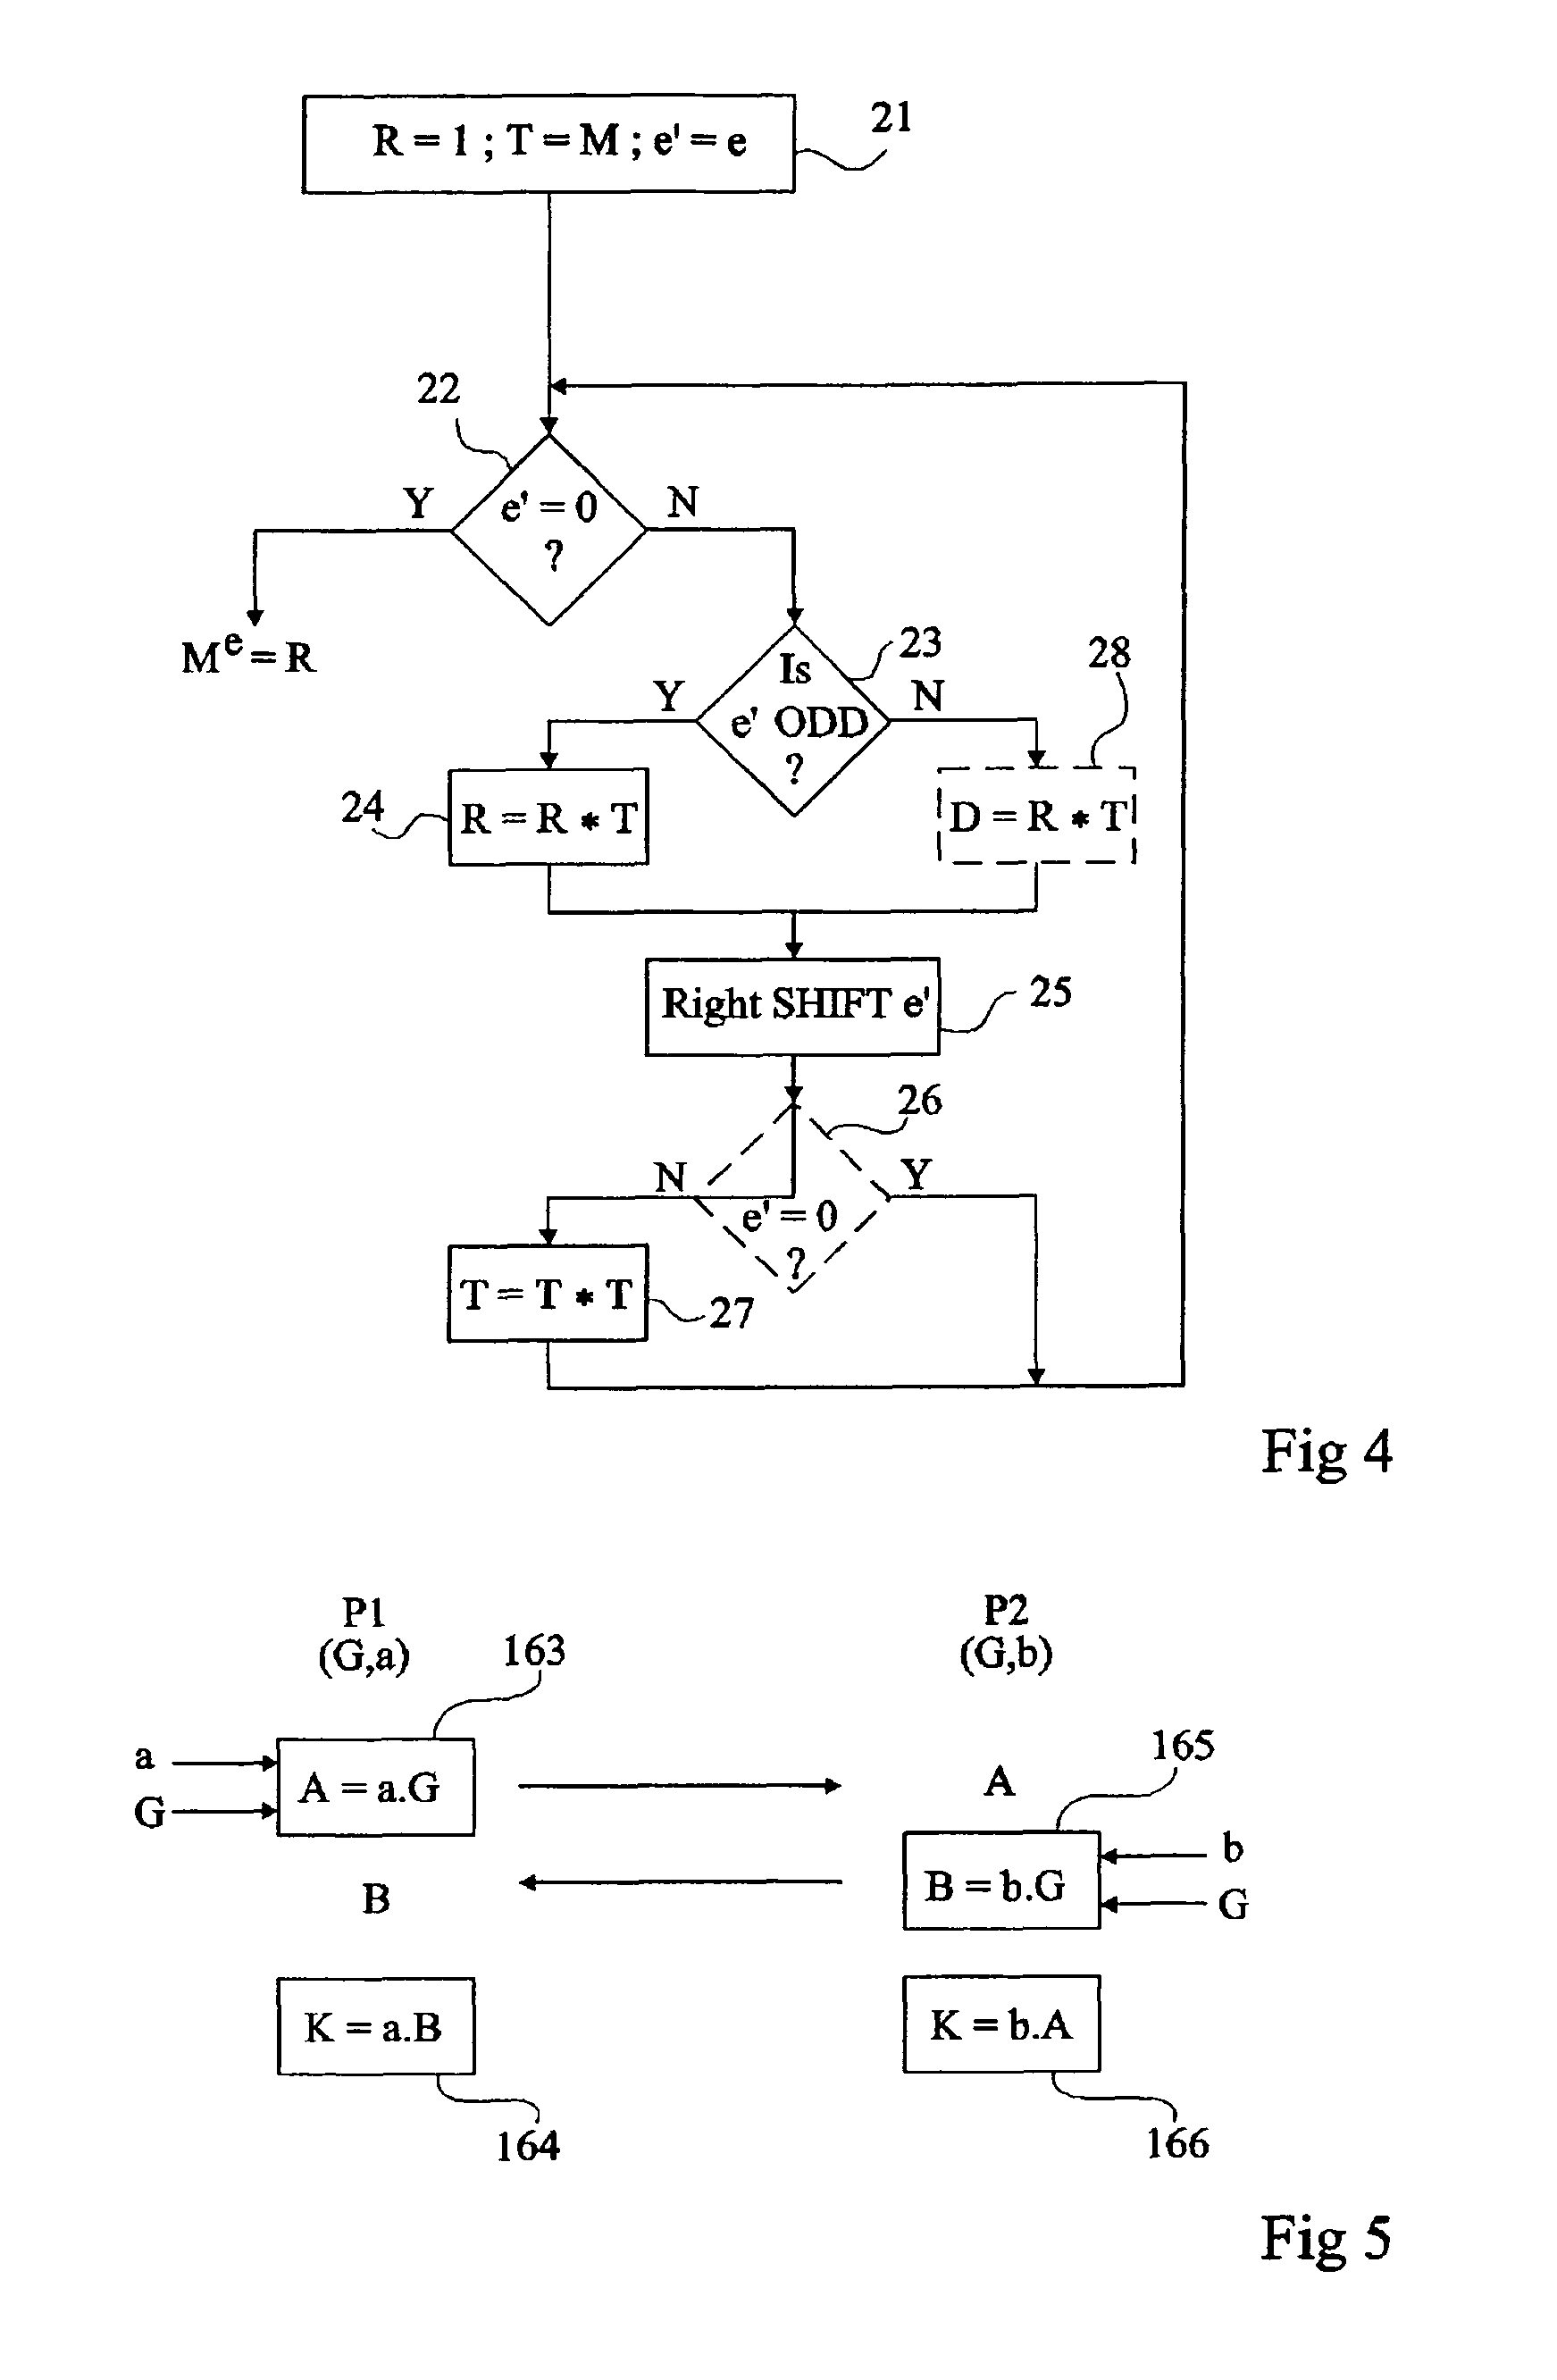 Detection of a disturbance in a calculation performed by an integrated circuit